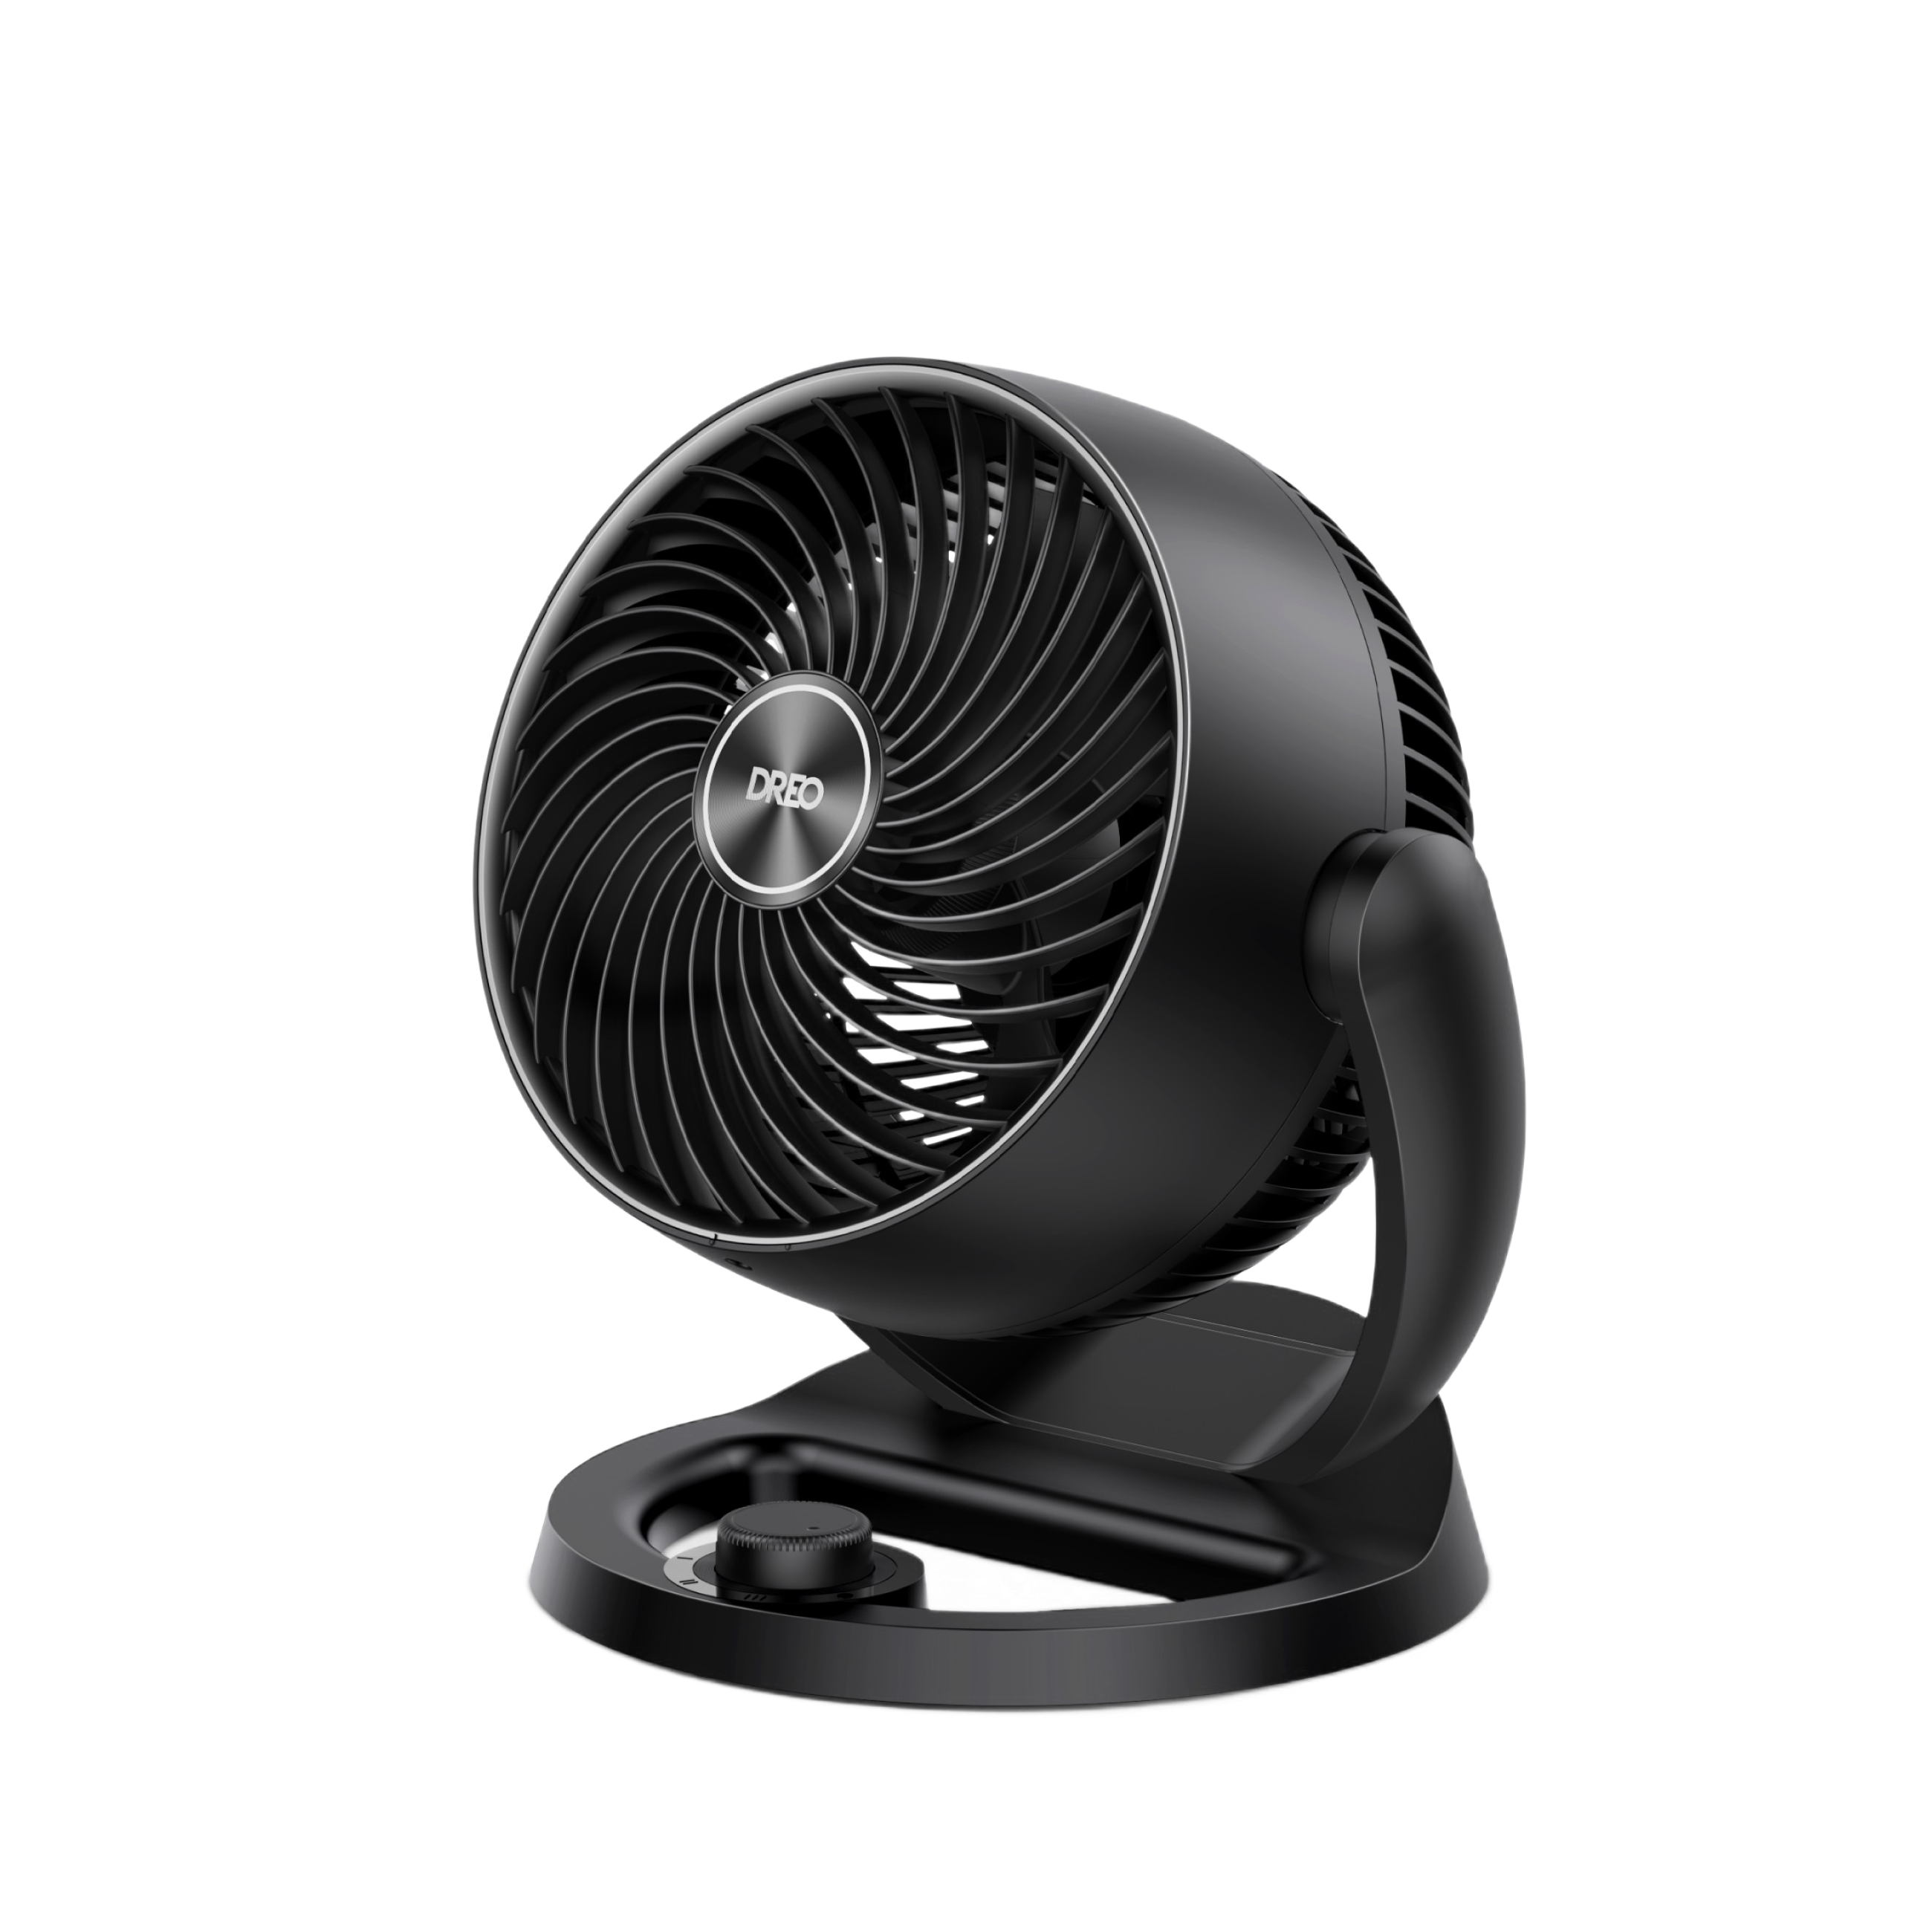 Dreo Desk Fans for Home, Whole Room Air Circulator Fan, 70ft Strong Airflow, 120° adjustable tilt, 28db Low Noise, Quiet, 3 Speeds, 9" Table Fan for Office, Bedroom